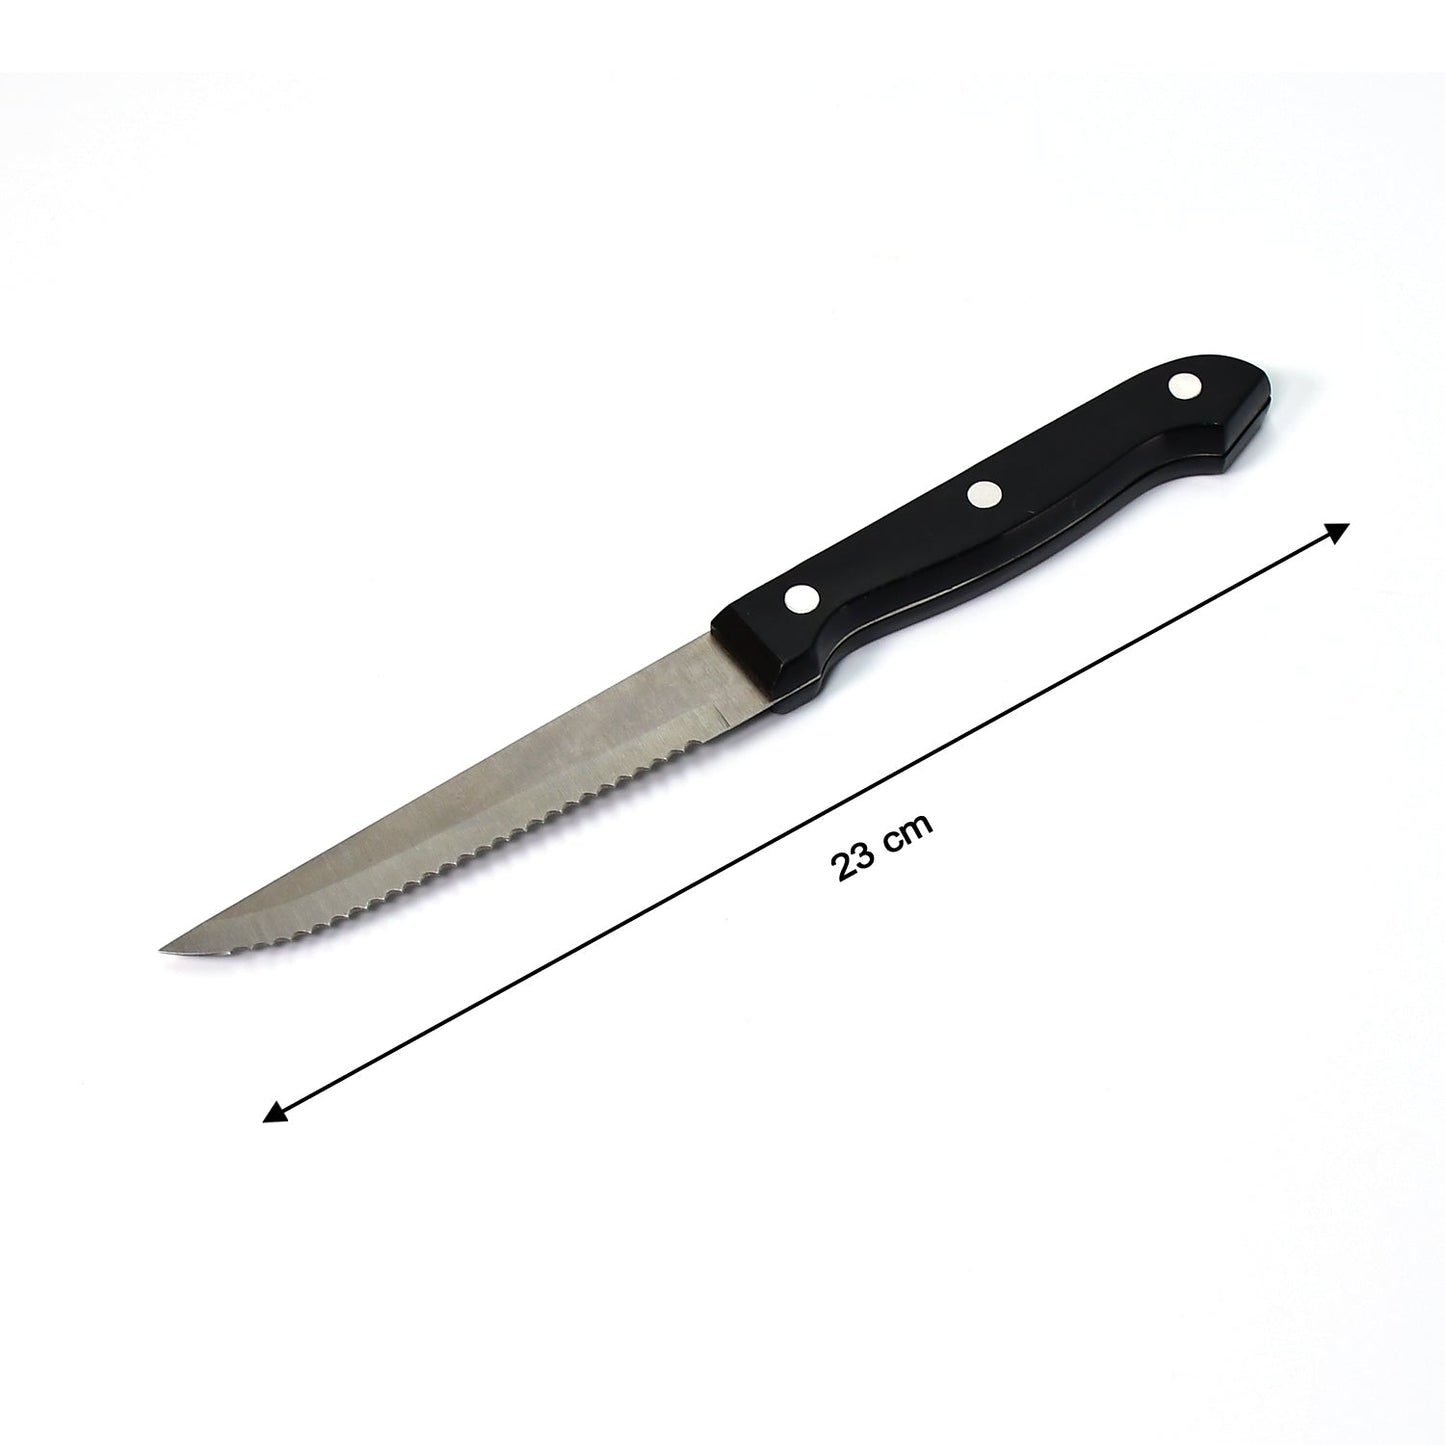 2130 Stainless Steel Steak and Kitchen Knife with easy grip Handle (23cm) DeoDap